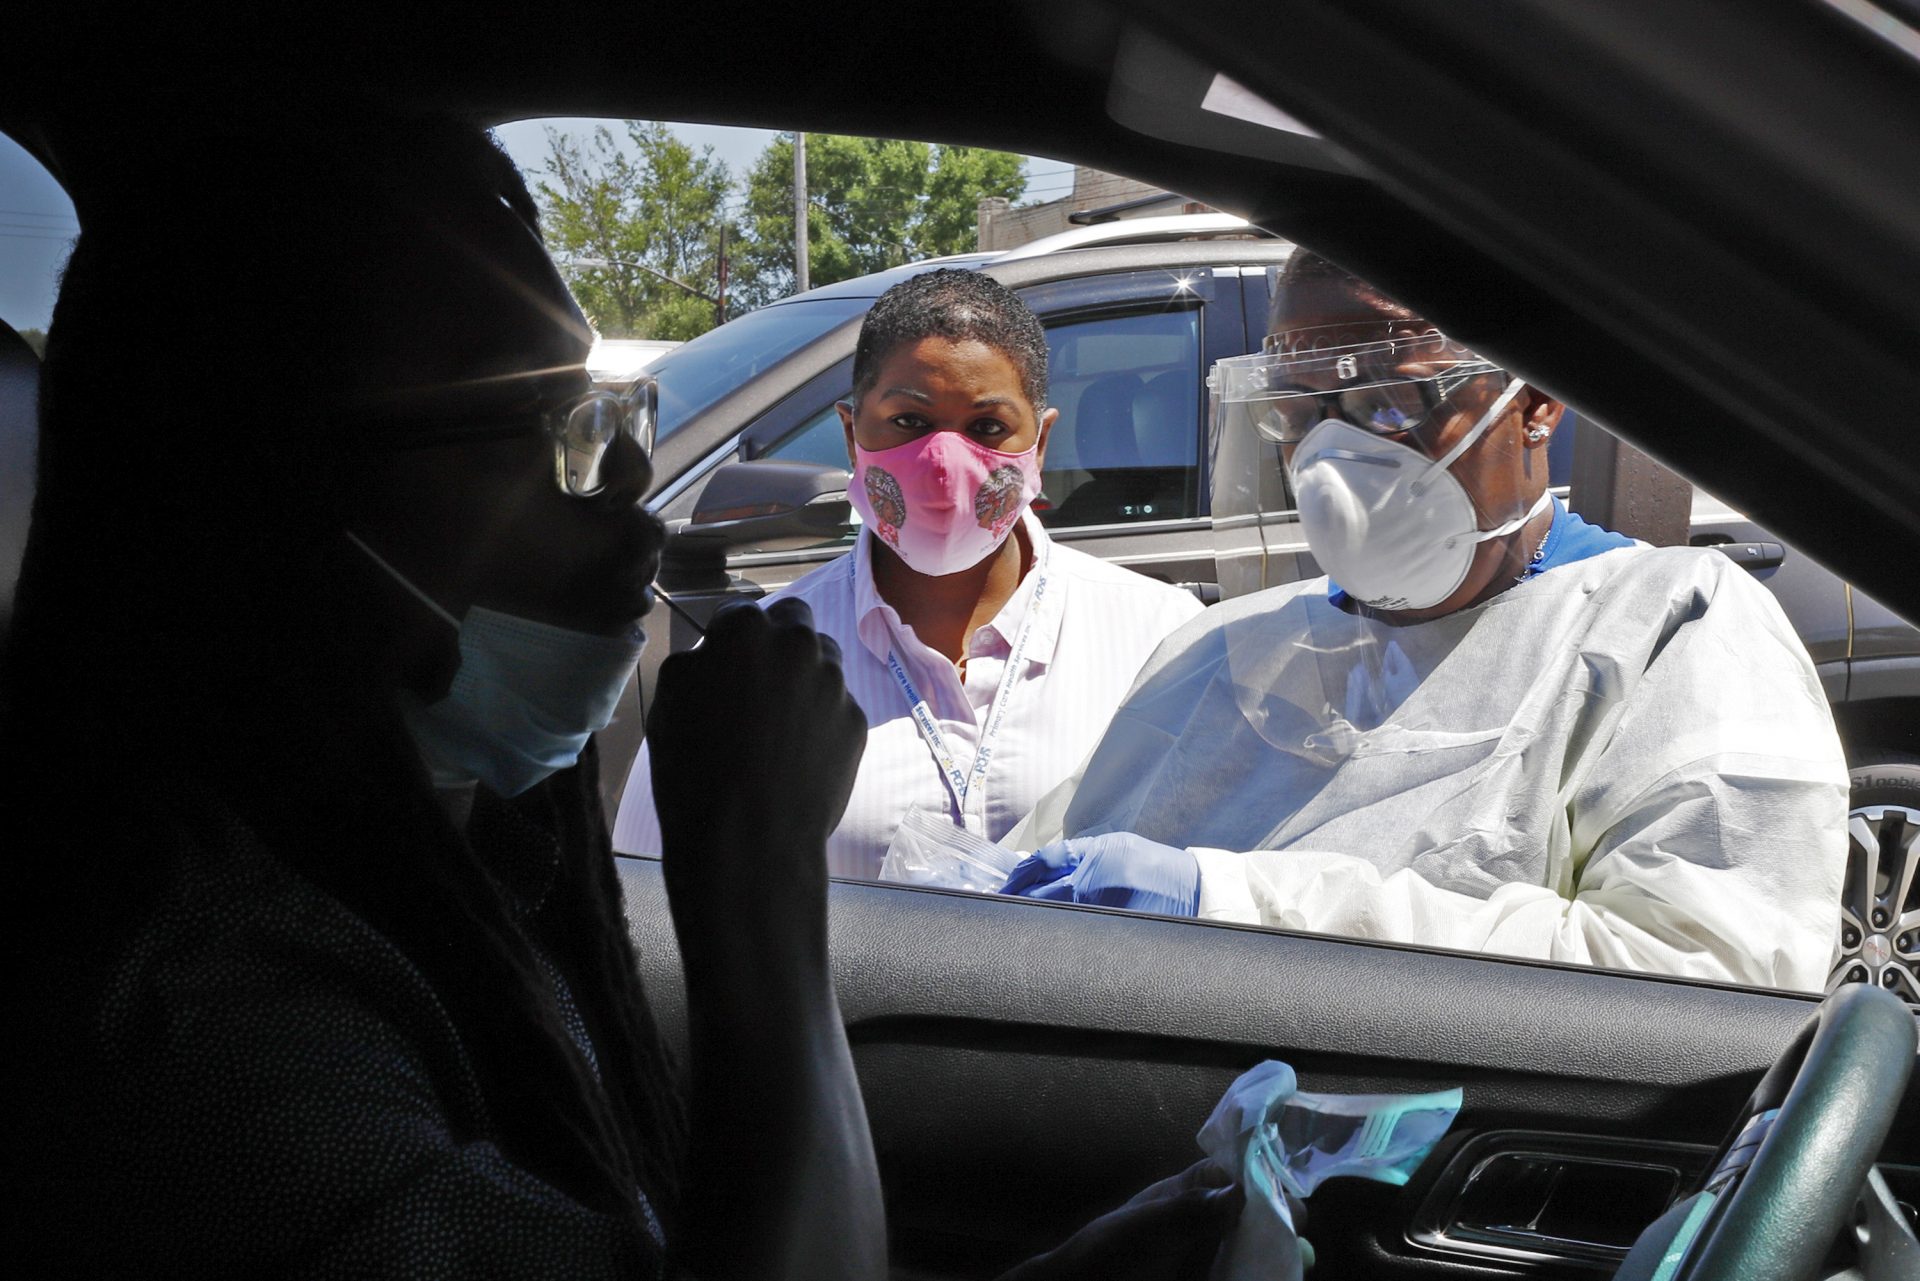 In this photo made on Monday, July 20, 2020, Kiva A. Fisher-Green, center, watches as nurse Ruth John, right, takes a sample from Walter Lewis for a COVID-19 test in the driveway of the Alma Illery Medical Center in the Homewood neighborhood of Pittsburgh. In March and April when Philadelphia and its surroundings became one of the nation's hot-spots for COVID-19 cases, Pittsburgh seemed at the time, to be under more control: the city racked up a fraction of the coronavirus cases as the other side of Pennsylvania.